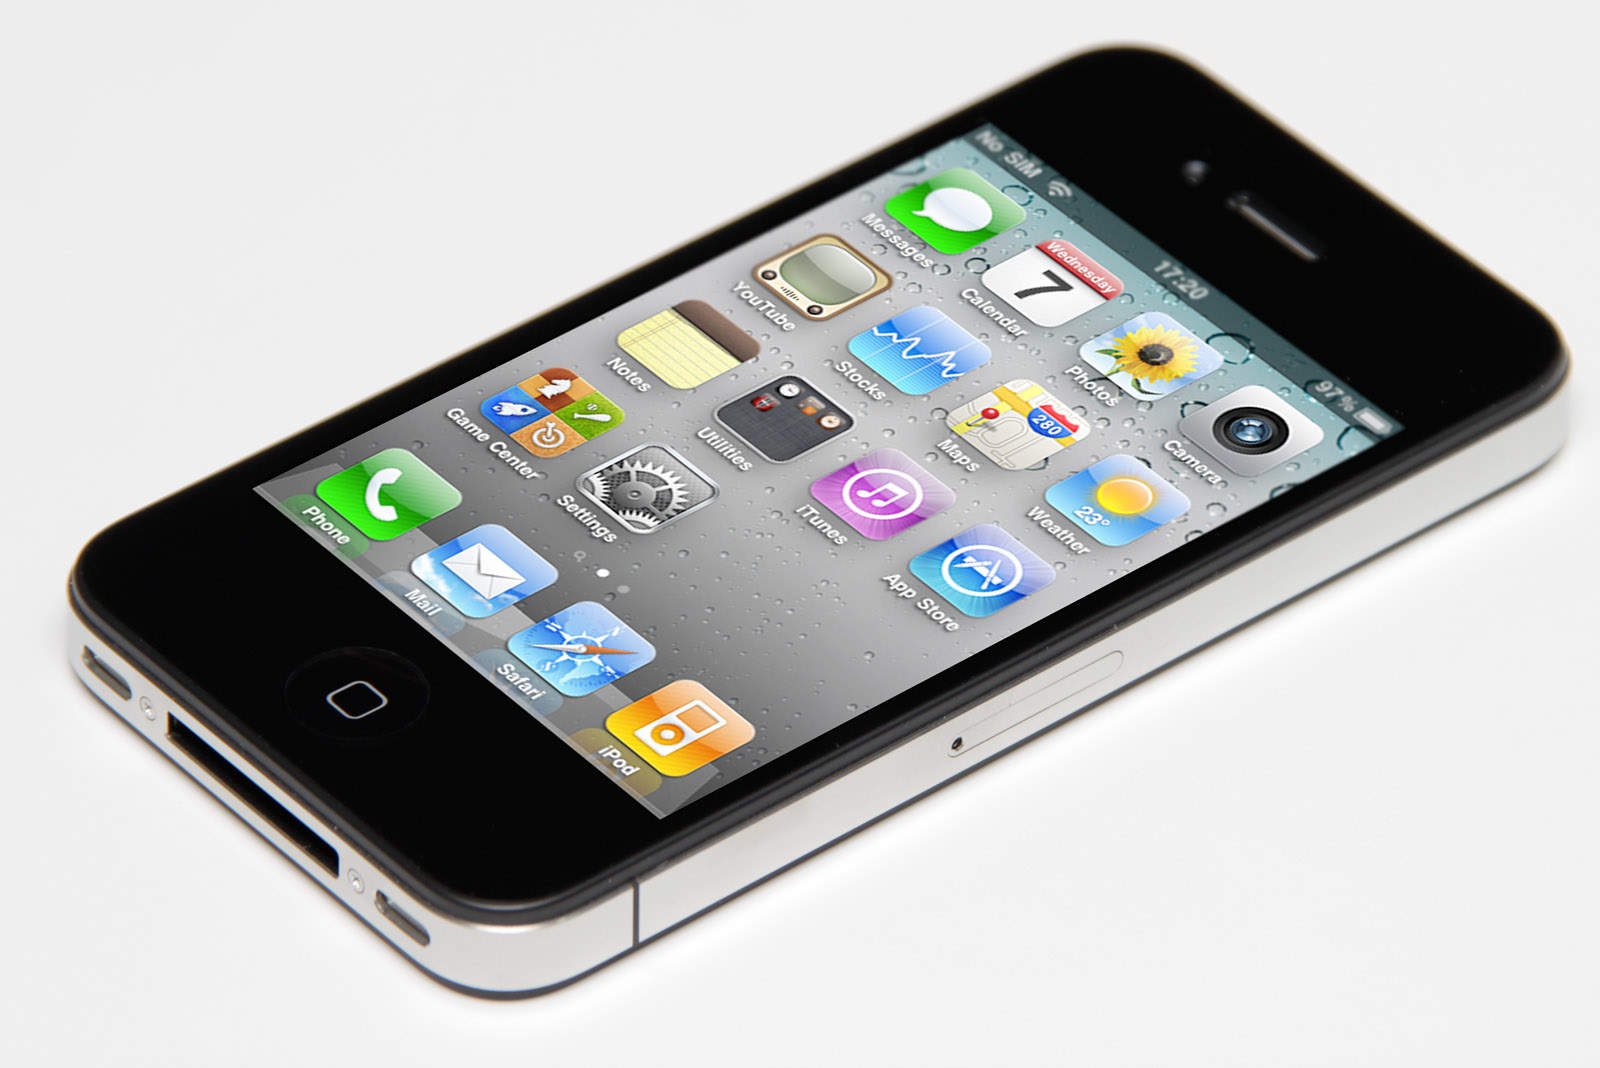 Next year's iPhone could resemble the classic iPhone 4.